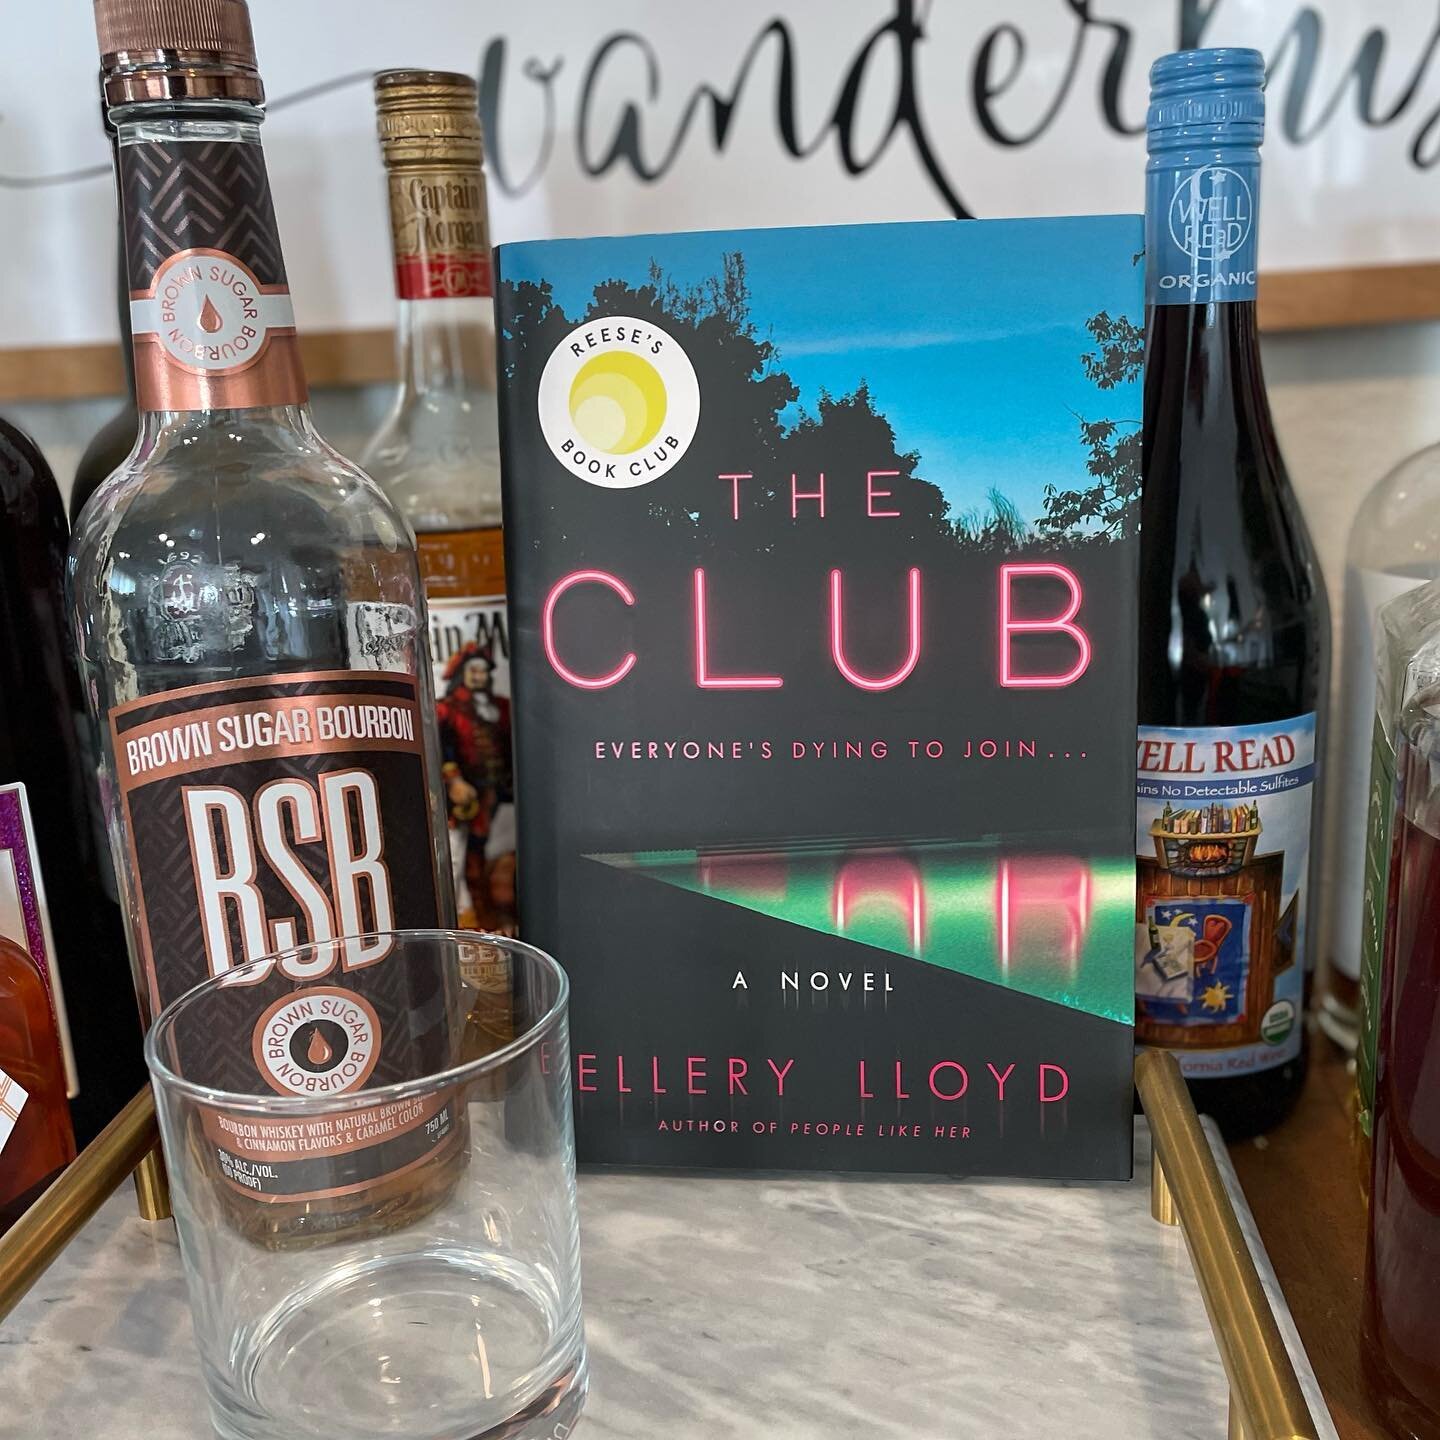 📖 THE CLUB by @ellerylloyd_author 

🕵🏻 Everyone's Dying to Join . . .

The Home Group is a glamorous collection of celebrity members' clubs dotted across the globe, where the rich and famous can party hard and then crash out in its five-star suite